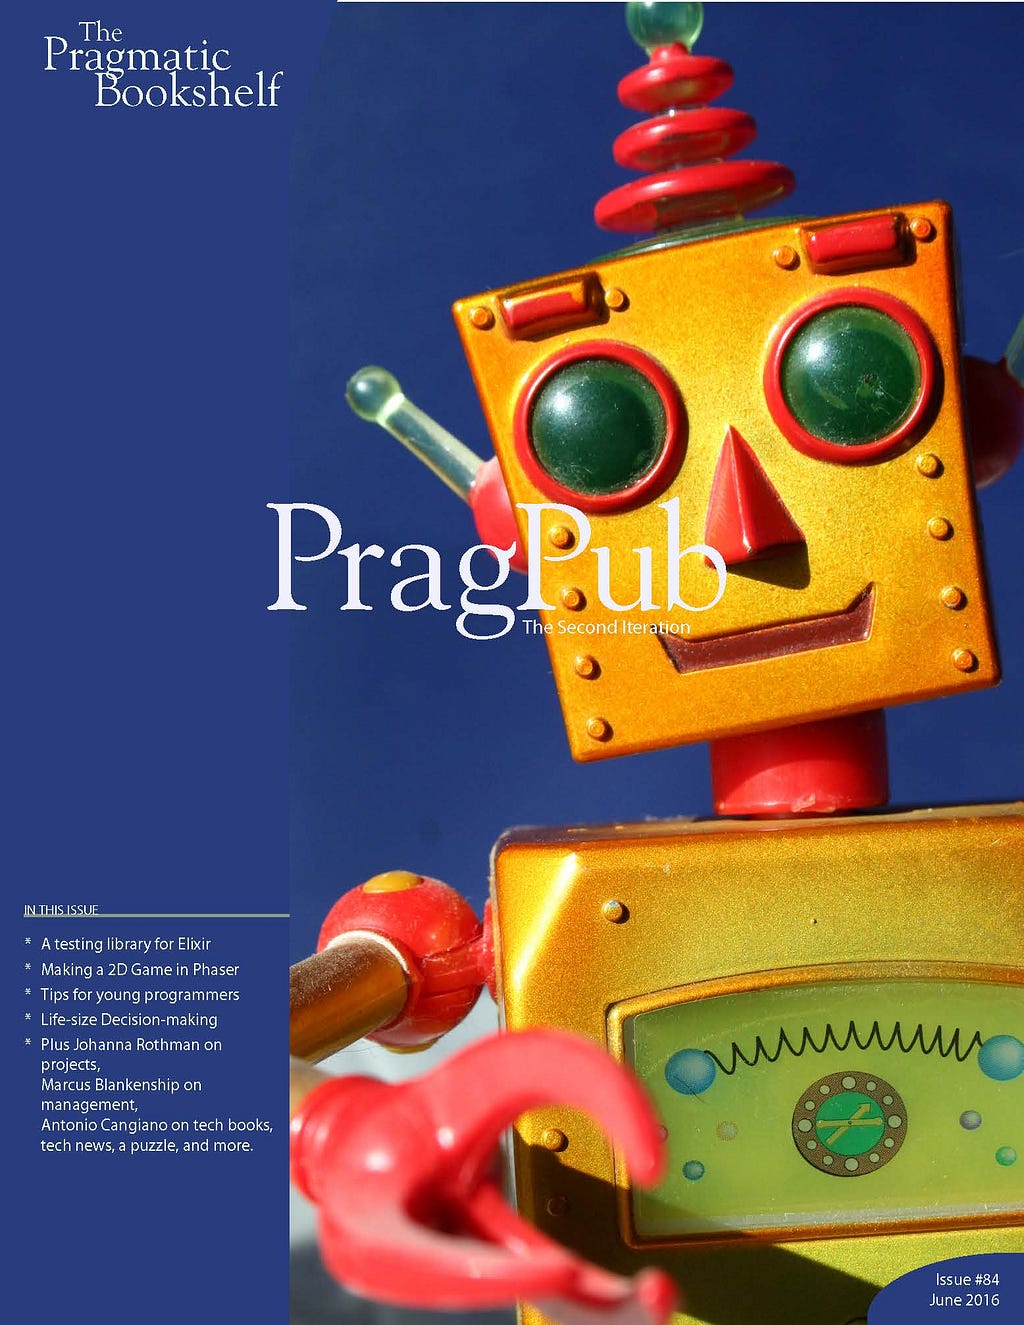 Cover from PragPub magazine, June 2016 featuring a friendly yellow robot on a blue background